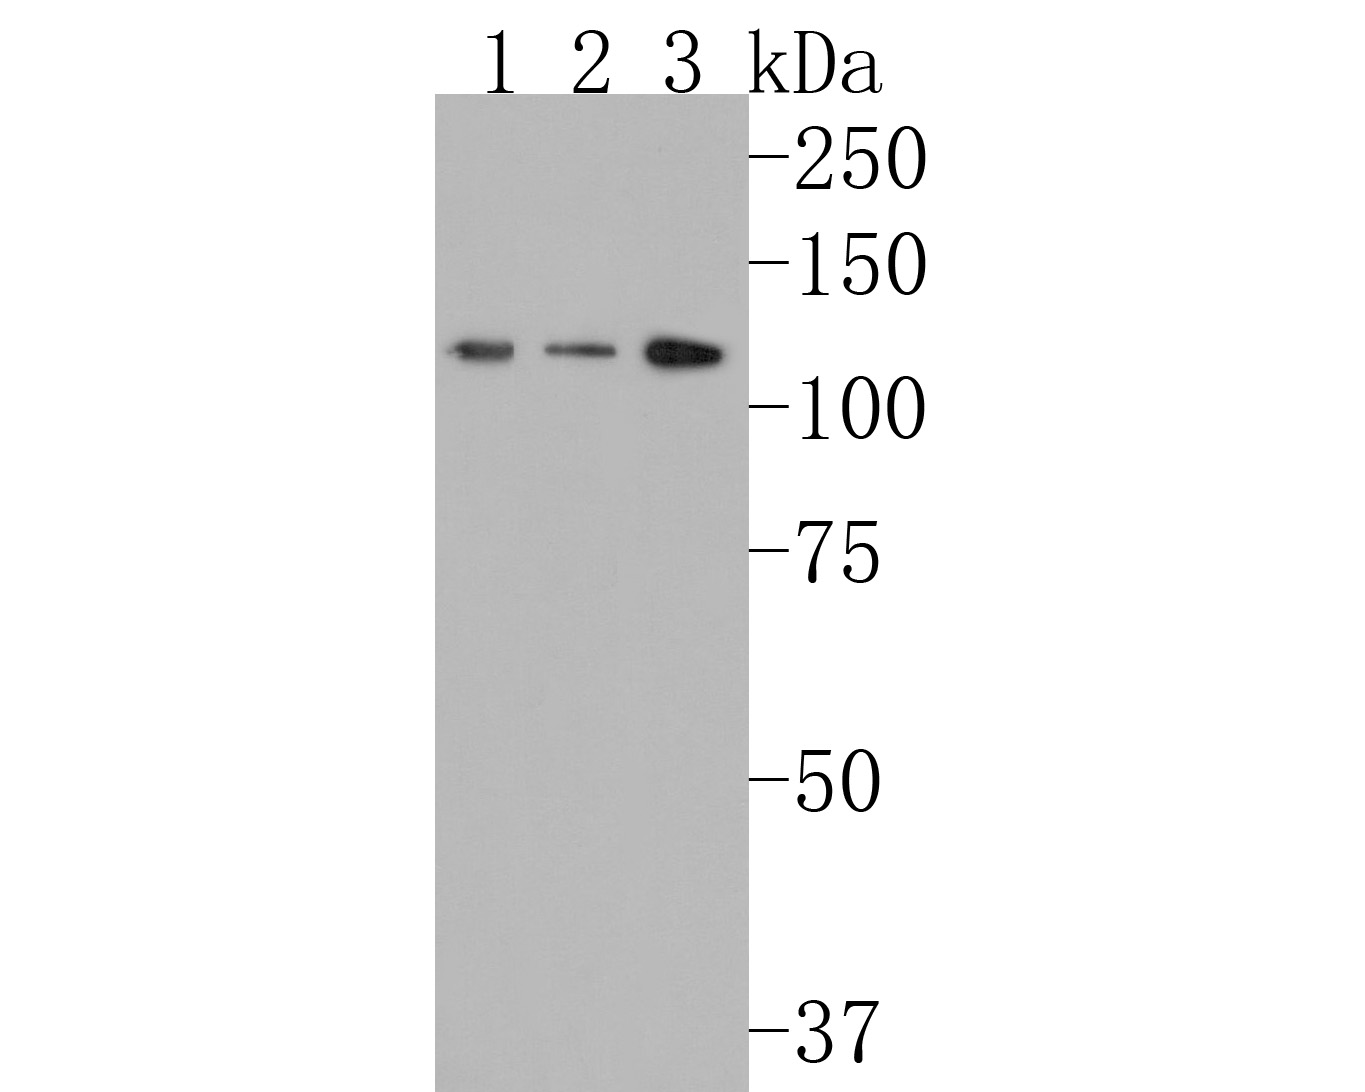 Western blot analysis of RASA1 on different lysates. Proteins were transferred to a PVDF membrane and blocked with 5% NFDM/TBST for 1 hour at room temperature. The primary antibody (HA720052, 1/500) was used in 5% NFDM/TBST at room temperature for 2 hours. Goat Anti-Rabbit IgG - HRP Secondary Antibody (HA1001) at 1:200,000 dilution was used for 1 hour at room temperature.<br />
Positive control: <br />
Lane 1: A431 cell lysate<br />
Lane 2: 293 cell lysate<br />
Lane 3: Mouse brain tissue lysate